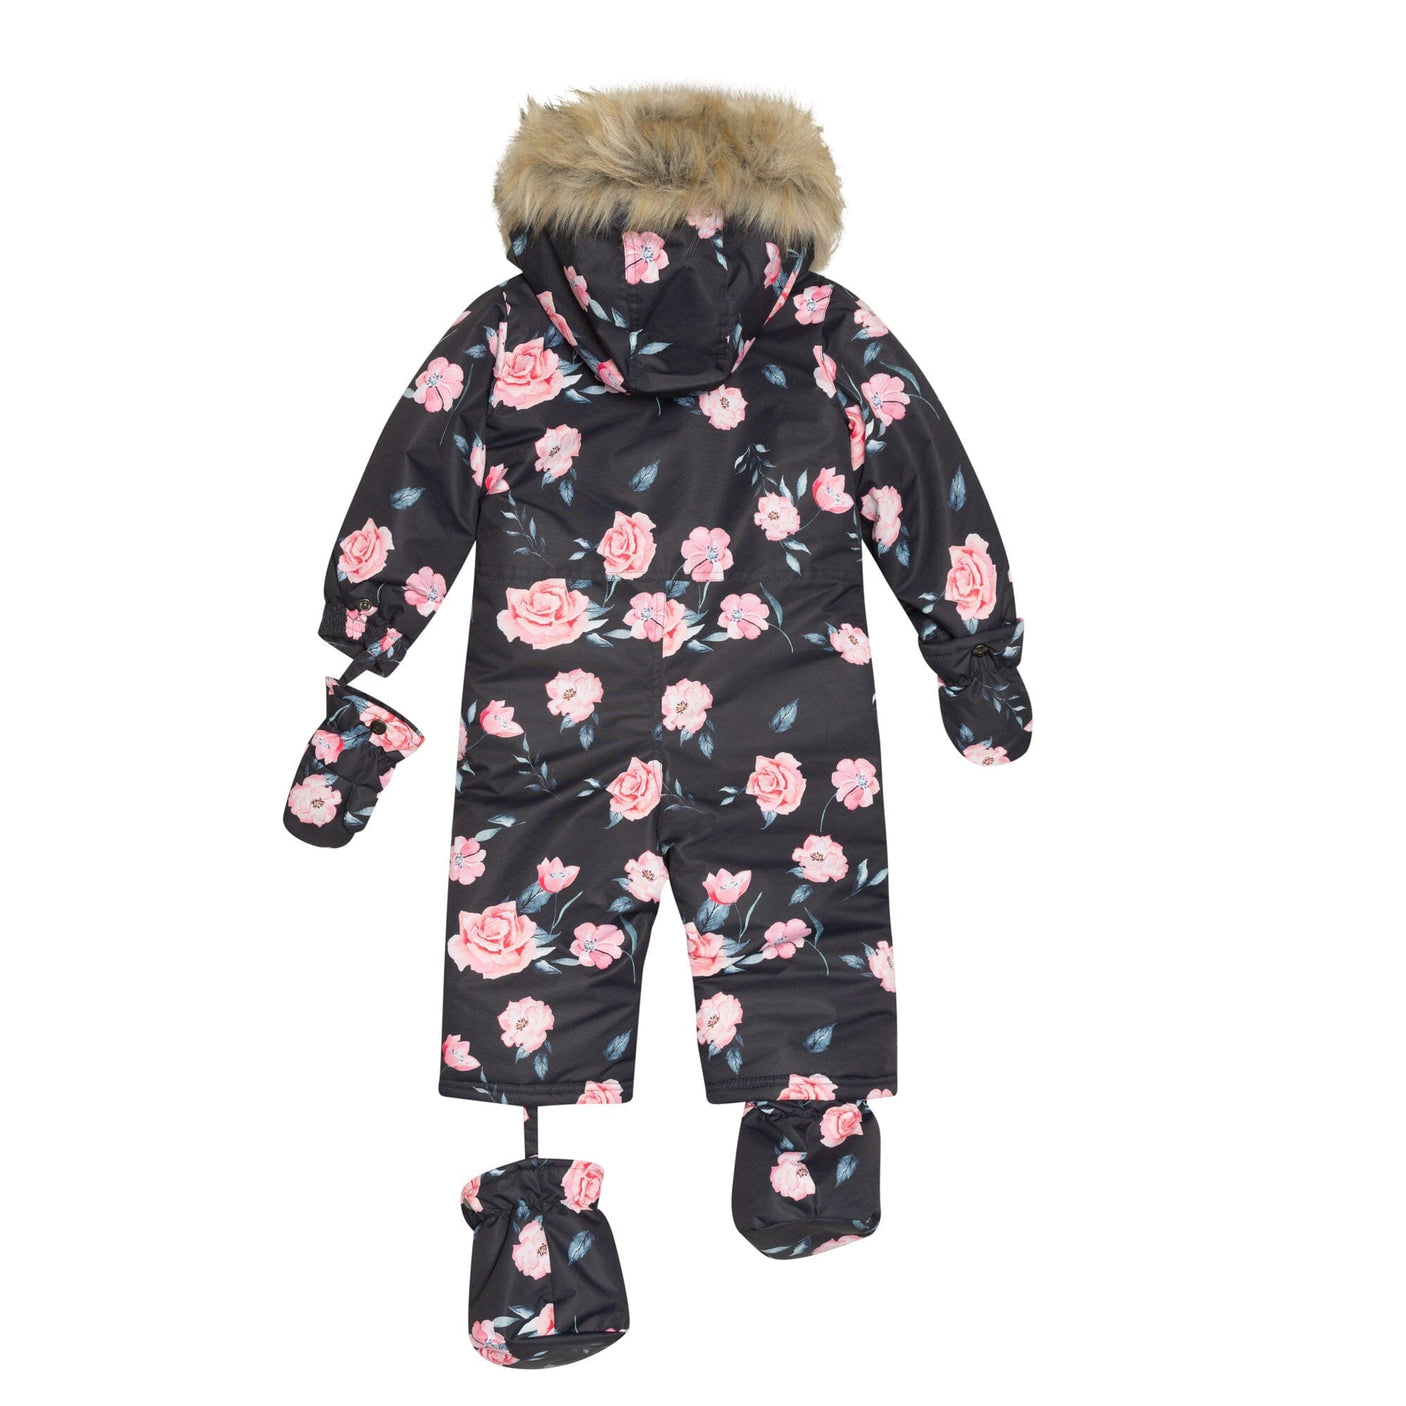 One Piece Baby Snowsuit Black With Rose Print-4